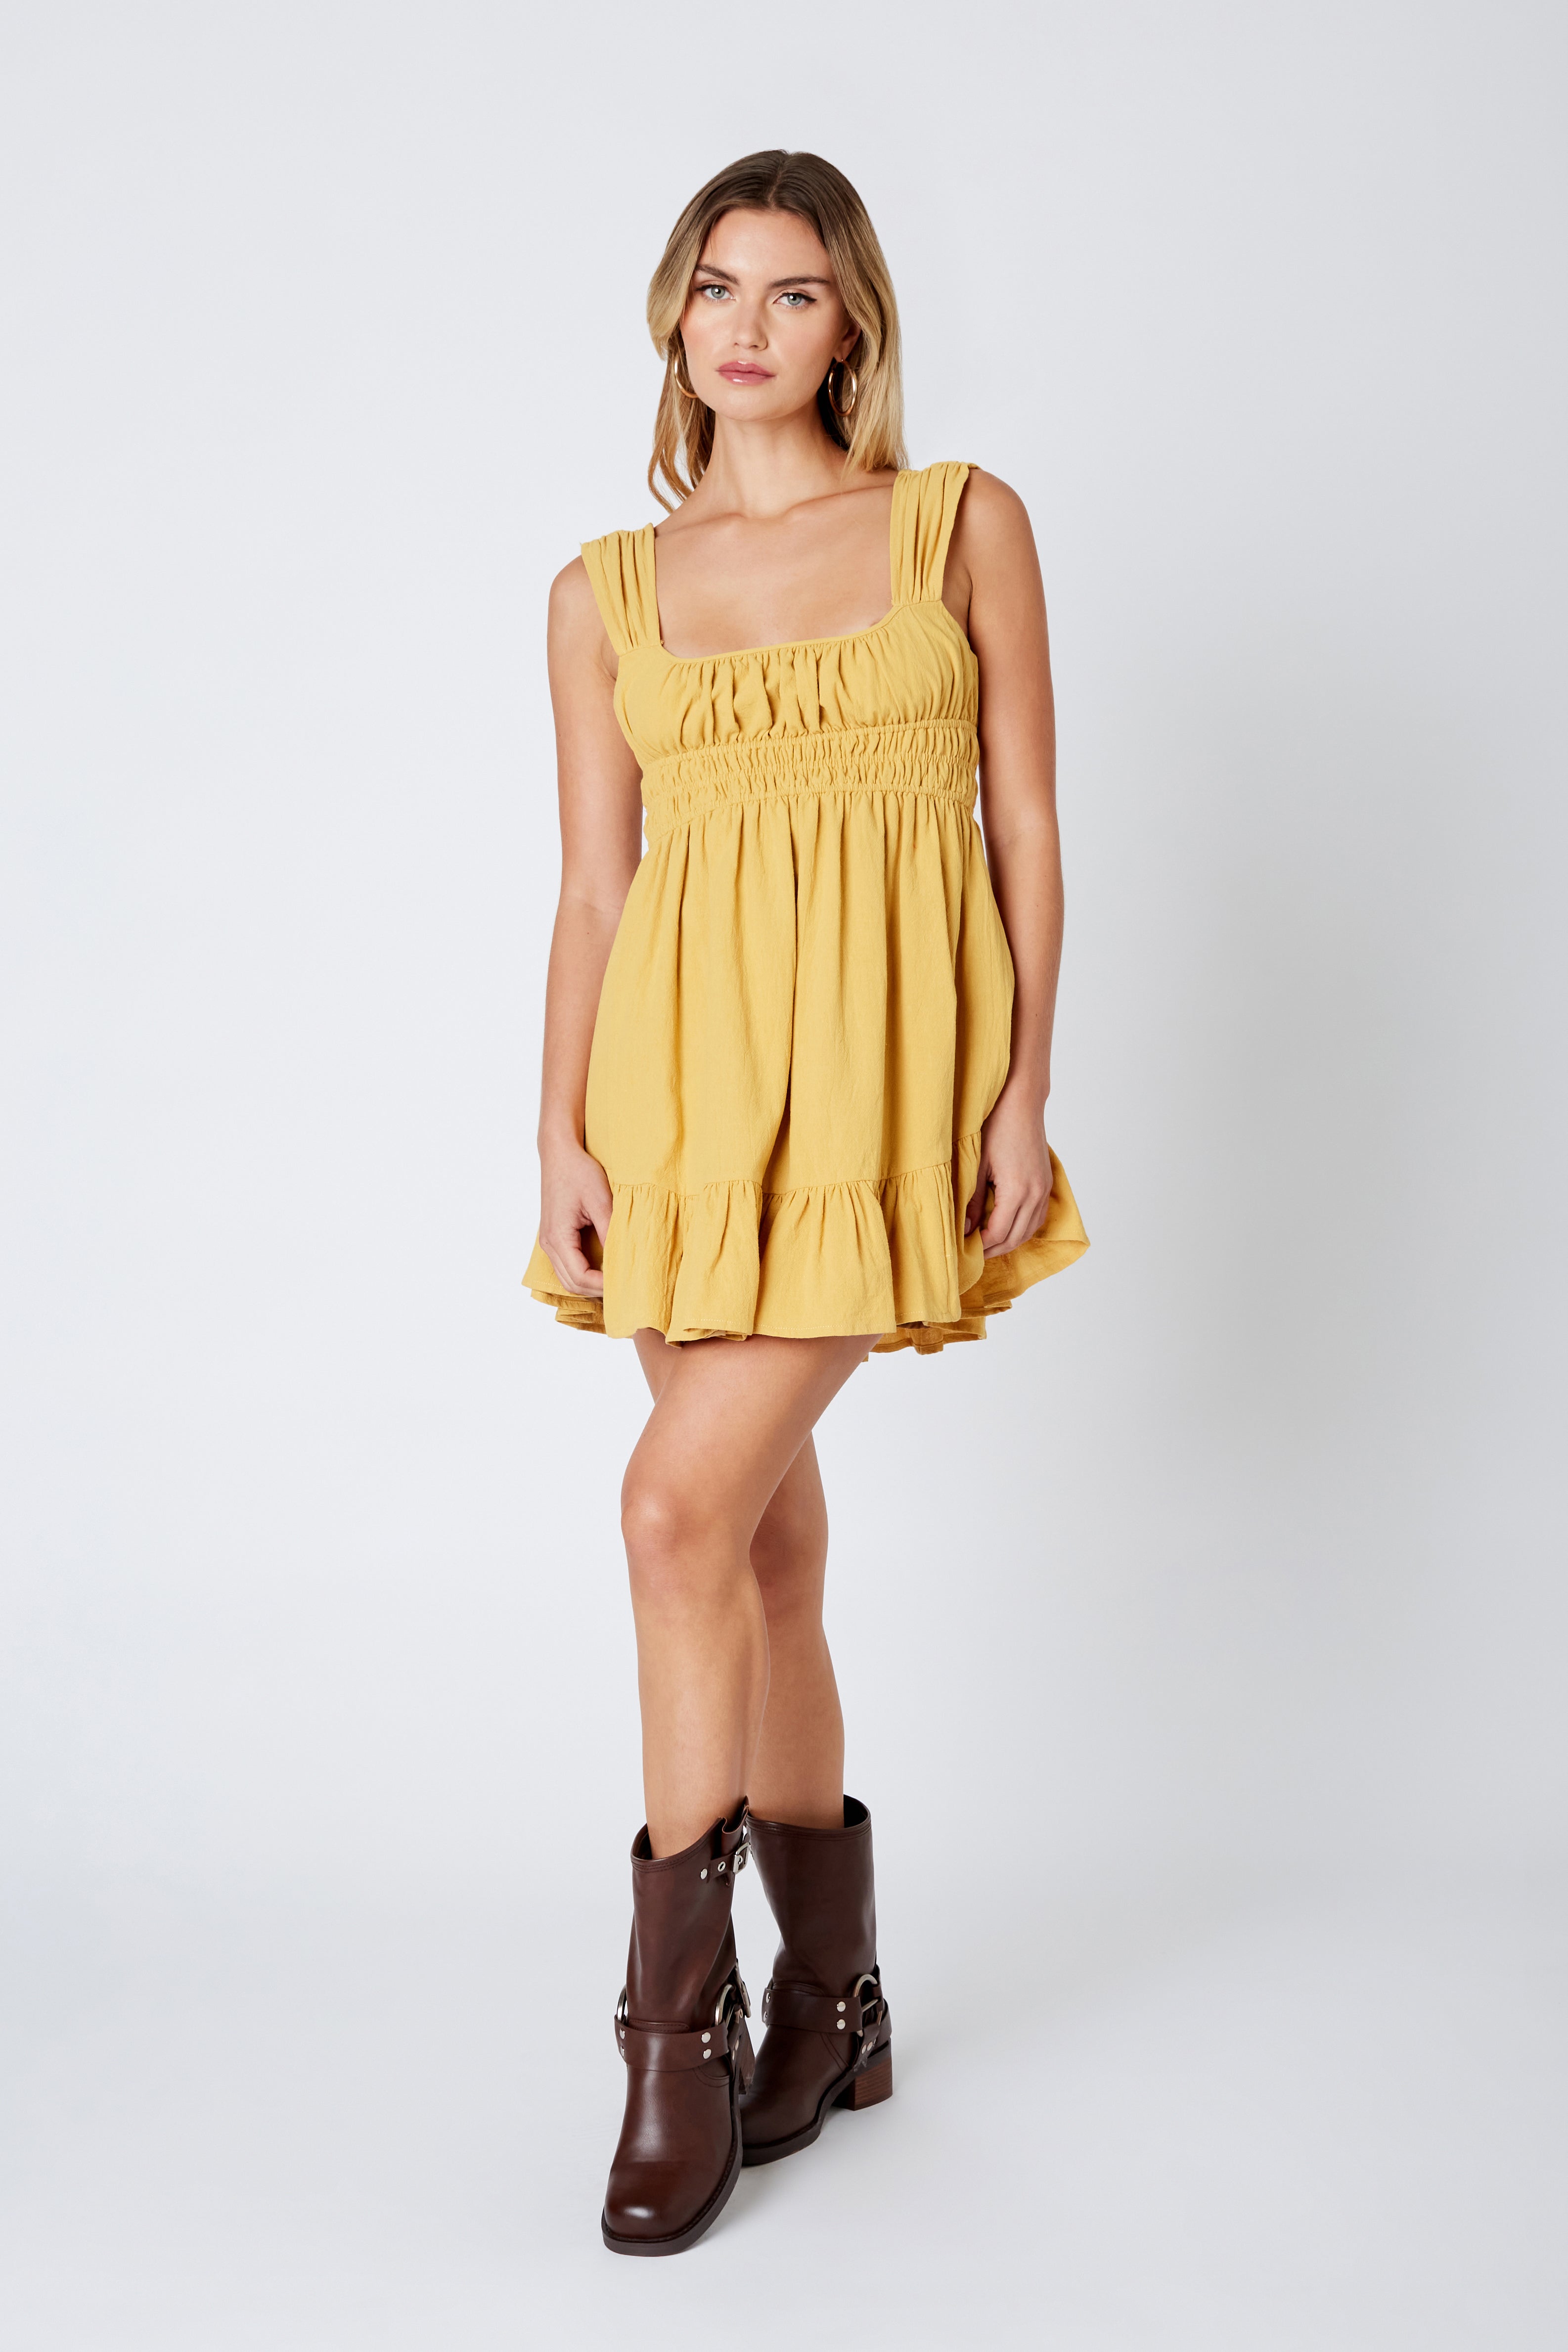 Cotton Summer Dress in honey front view